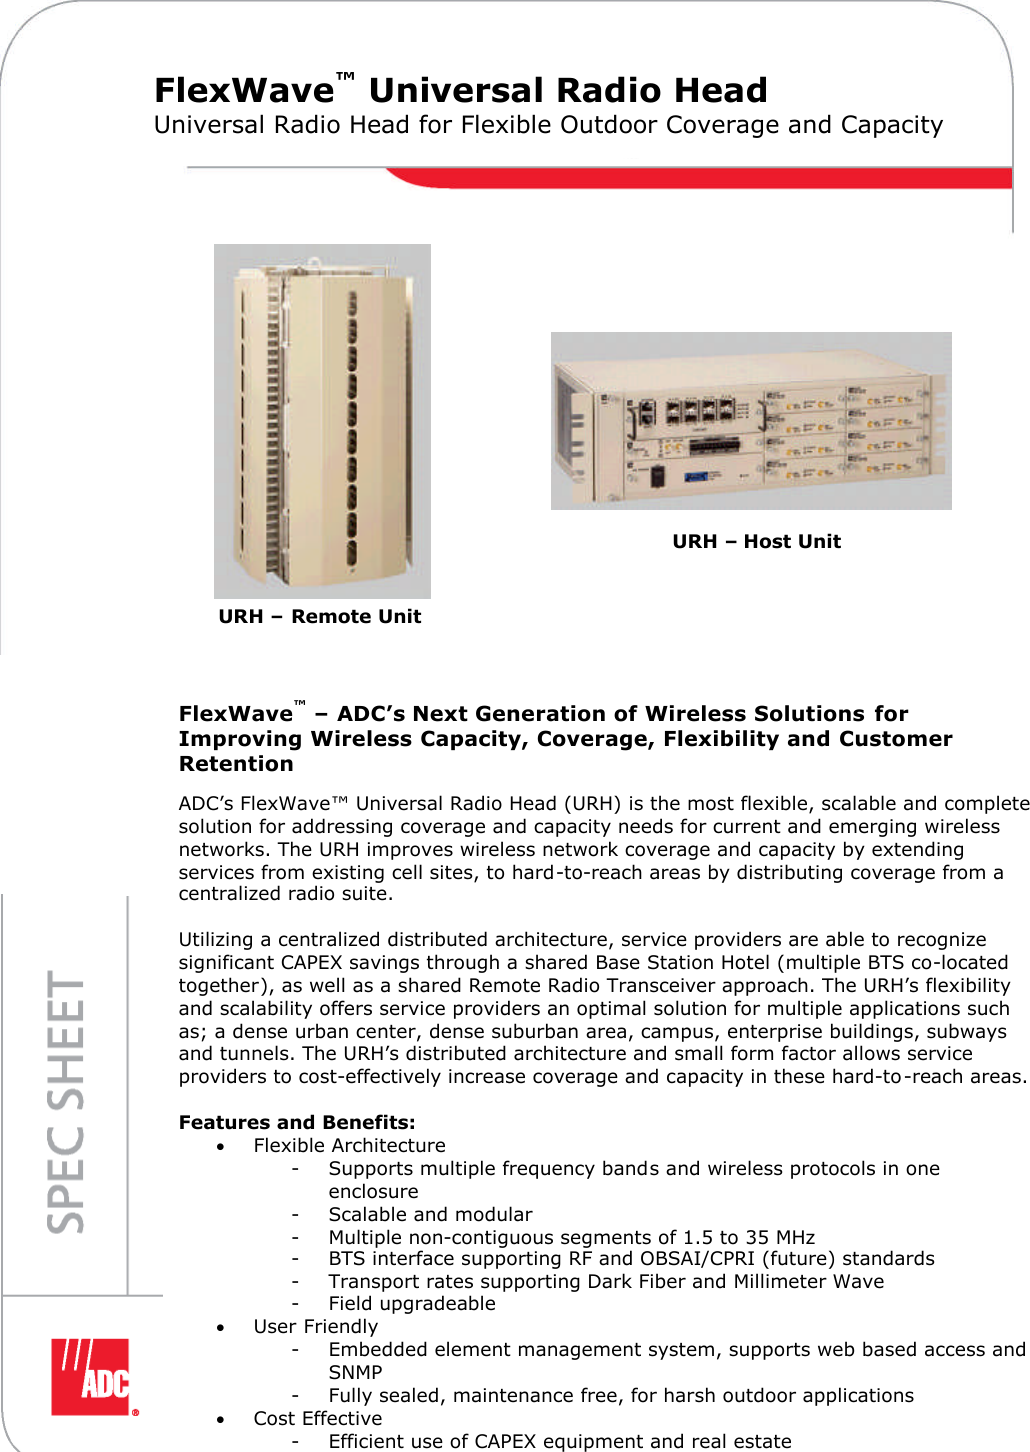 FlexWave™– ADC’s Next Generation of Wireless Solutions forImproving Wireless Capacity, Coverage, Flexibility and CustomerRetentionDigivance®Long-Range CoverageTri-Band 800/900 andw w w . a d c . c o m • + 1 - 9 5 2 - 9 3 8 - 8 0 8 0 • 1 - 8 0 0 - 3 6 6 - 3 8 9 1FlexWave™Universal Radio HeadUniversal Radio Head for Flexible Outdoor Coverage and CapacityURH–Remote UnitURH–Host UnitADC’s FlexWave™Universal Radio Head (URH) is the most flexible, scalable and completesolution for addressing coverage and capacity needs for current and emerging wirelessnetworks. The URH improves wireless network coverage and capacity by extendingservices from existing cell sites, to hard-to-reach areas by distributing coverage from acentralized radio suite.Utilizing a centralized distributed architecture, service providers are able to recognizesignificant CAPEX savings through a shared Base Station Hotel (multiple BTS co-locatedtogether), as well as a shared Remote Radio Transceiver approach. The URH’s flexibilityand scalability offers service providers an optimal solution for multiple applications suchas; a dense urban center, dense suburban area, campus, enterprise buildings, subwaysand tunnels. The URH’s distributed architecture and small form factor allows serviceproviders to cost-effectively increase coverage and capacity in these hard-to-reach areas.Features and Benefits:Flexible Architecture- Supports multiple frequency bands and wireless protocols in oneenclosure- Scalable and modular- Multiple non-contiguous segments of 1.5 to 35 MHz- BTS interface supporting RF and OBSAI/CPRI (future) standards- Transport rates supporting Dark Fiber and Millimeter Wave- Field upgradeableUser Friendly- Embedded element management system, supports web based access andSNMP- Fully sealed, maintenance free, for harsh outdoor applicationsCost Effective- Efficient use of CAPEX equipment and real estate